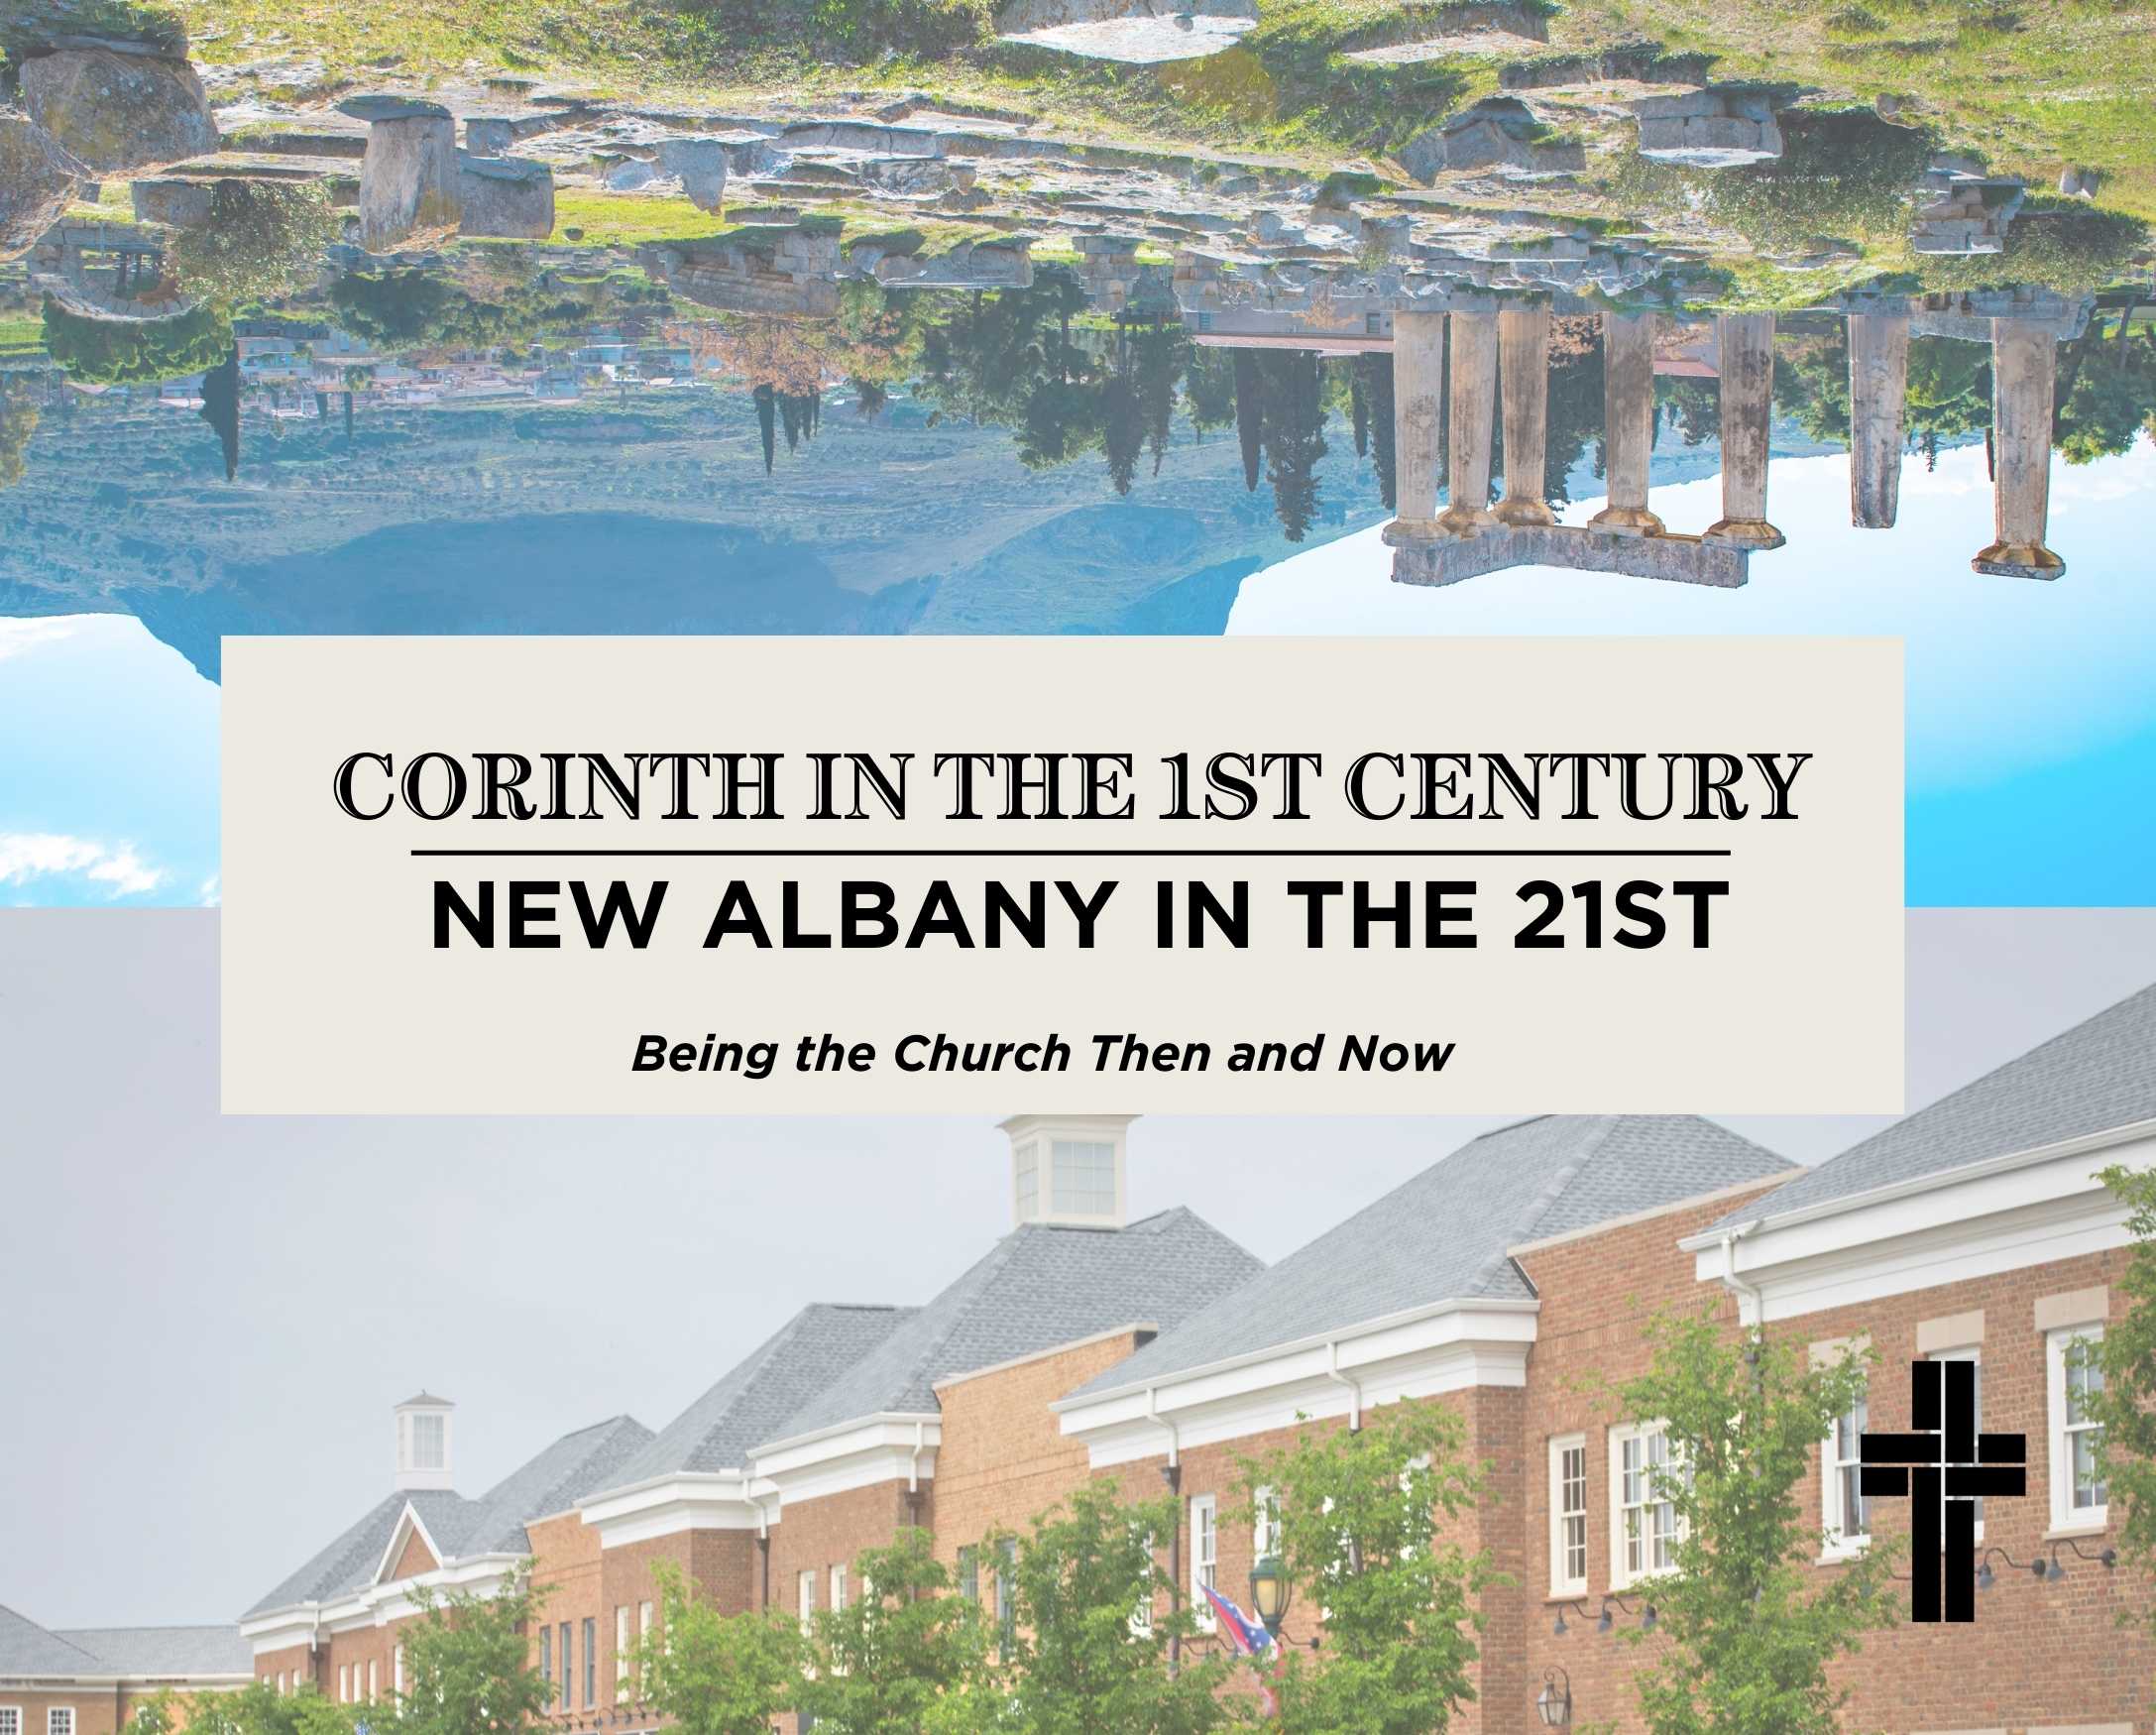 Corinth in the 1st Century, New Albany in the 21st: Many Gifts, One Body